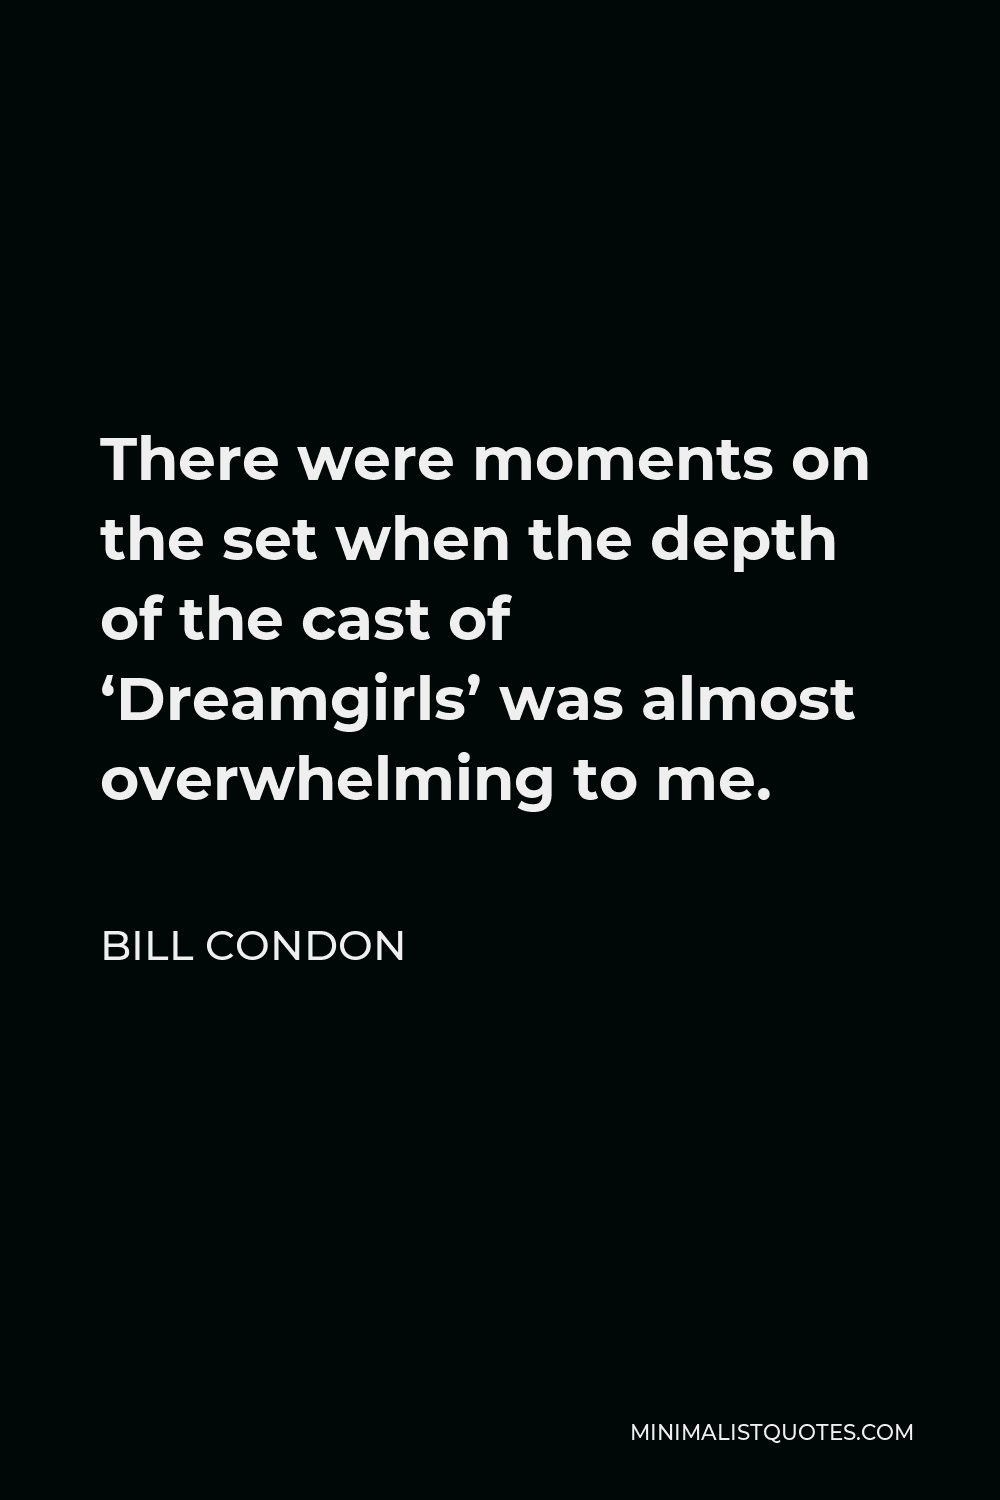 Bill Condon Quote - There were moments on the set when the depth of the cast of ‘Dreamgirls’ was almost overwhelming to me.